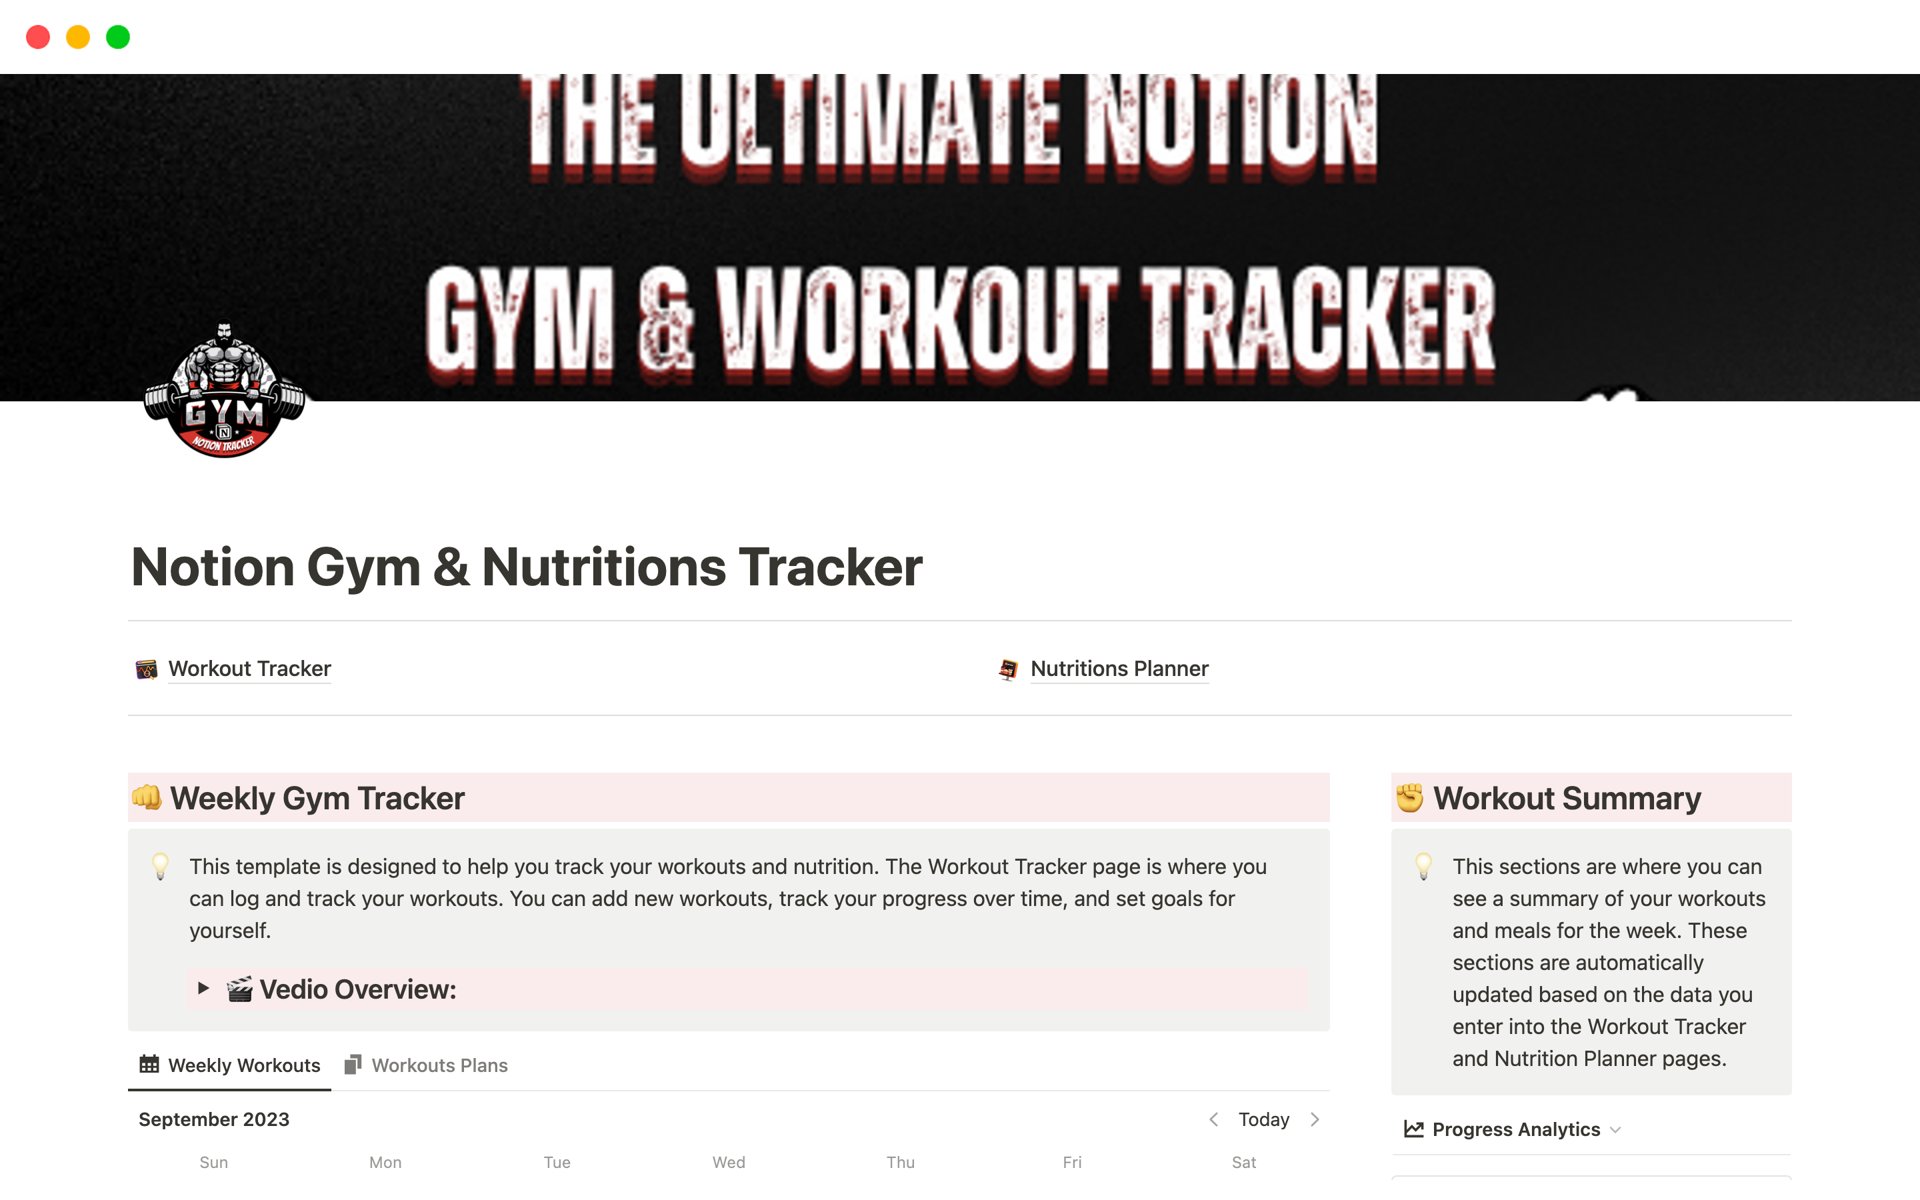 Are you someone who takes their fitness seriously? Do you want to keep track of your gym performance and see how far you've come? If so, you need to check The ultimate tool for serious fitness enthusiasts: "Notion Gym & Nutrition Tracker"